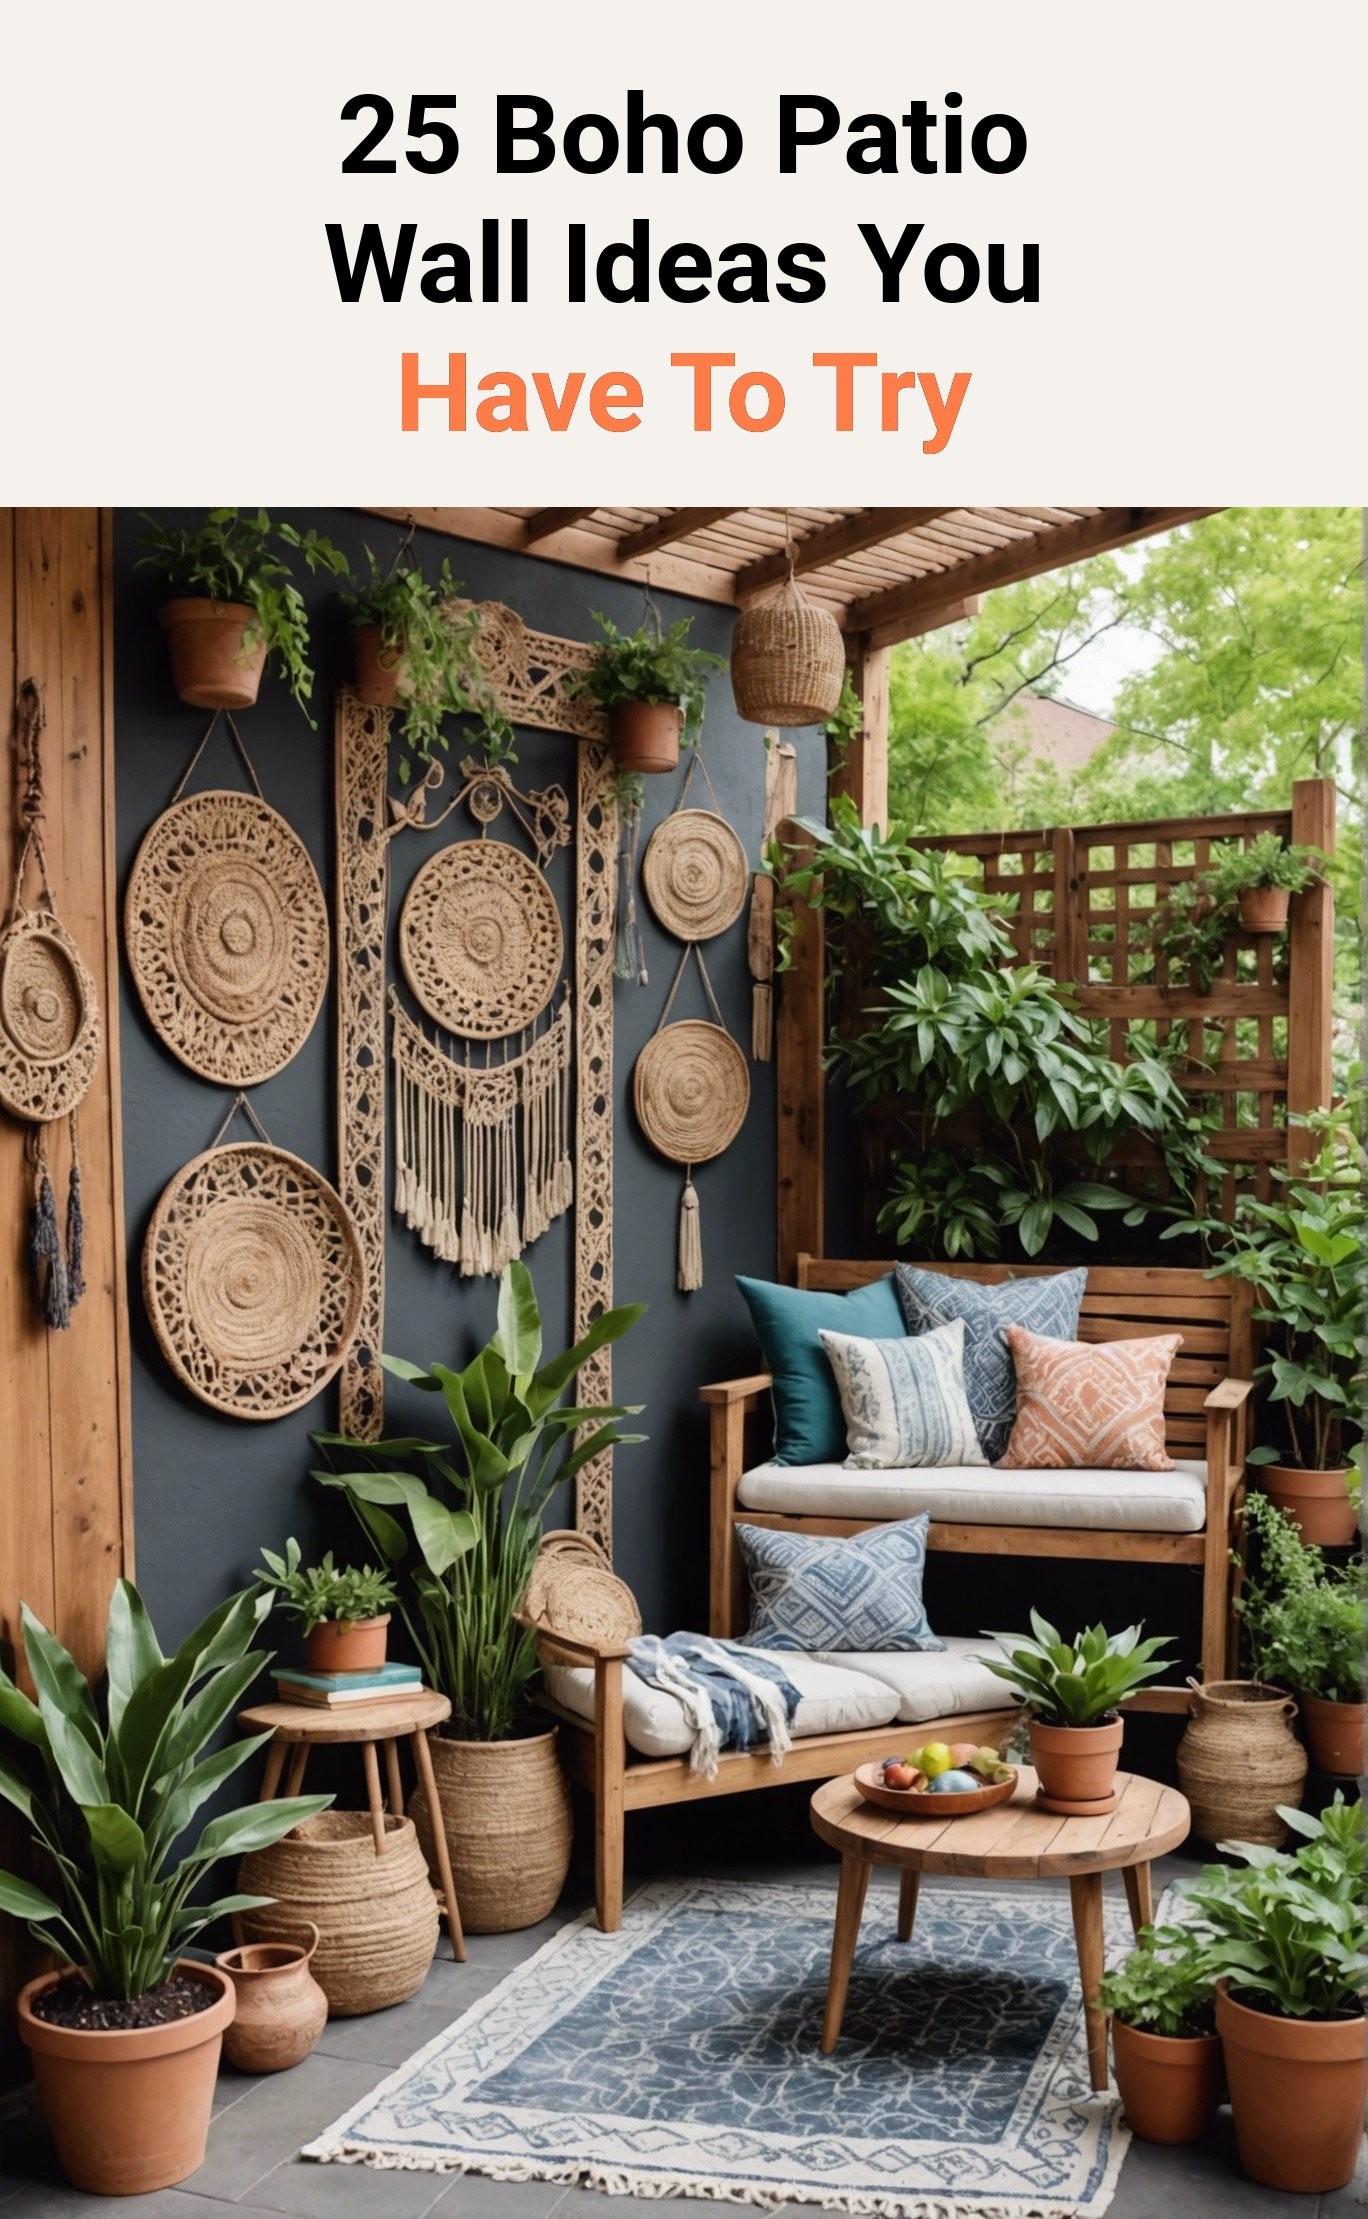 25 Boho Patio Wall Ideas You Have To Try